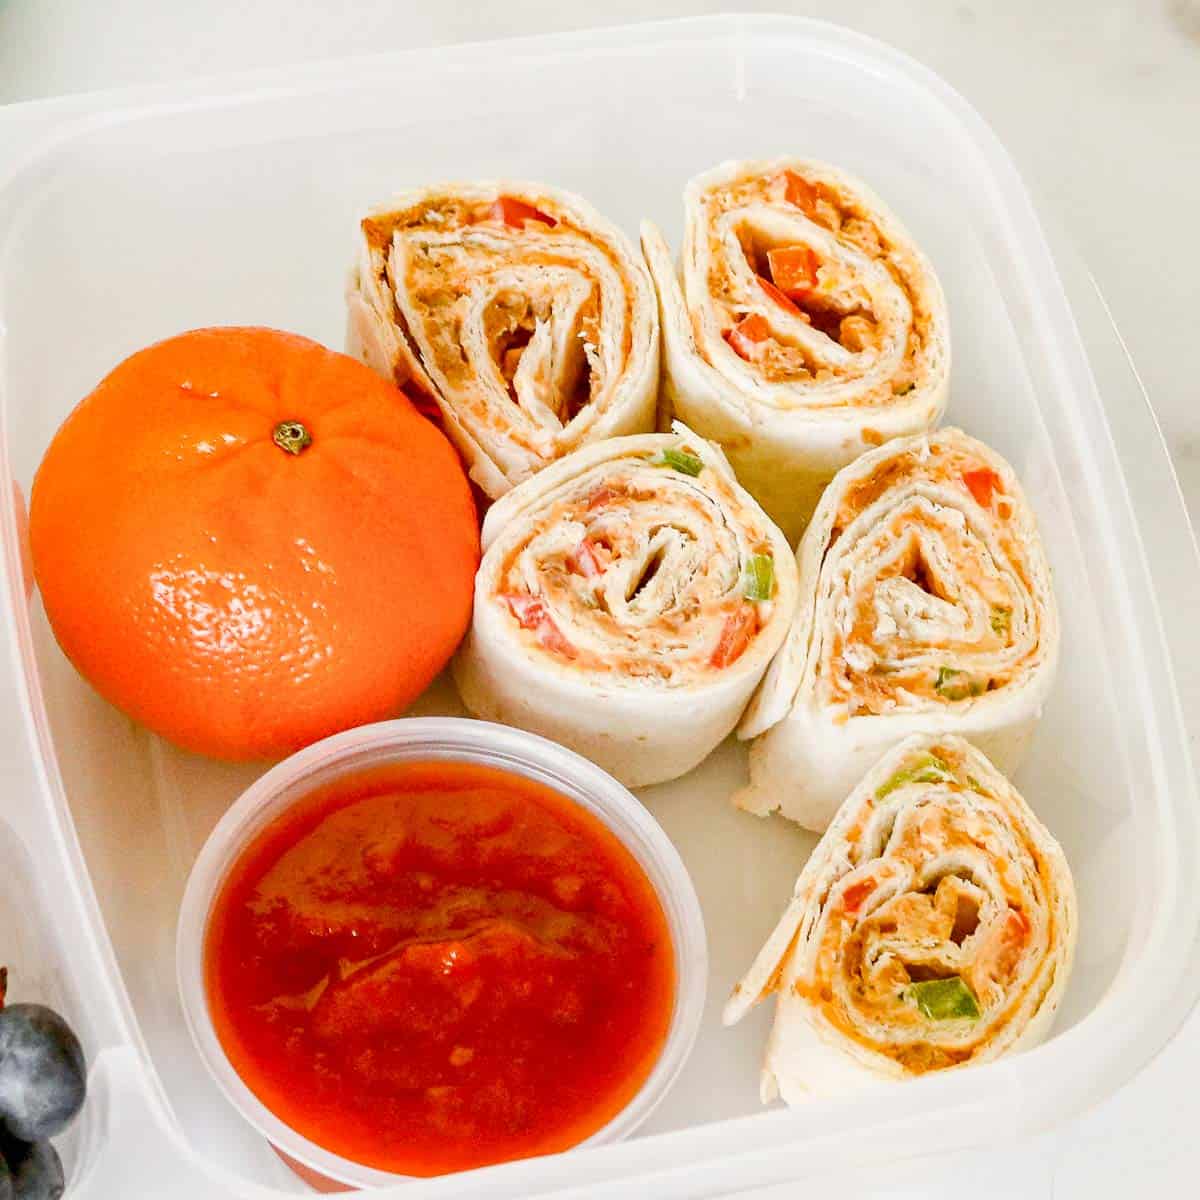 Taco pinwheels with salsa for dipping in a lunch container